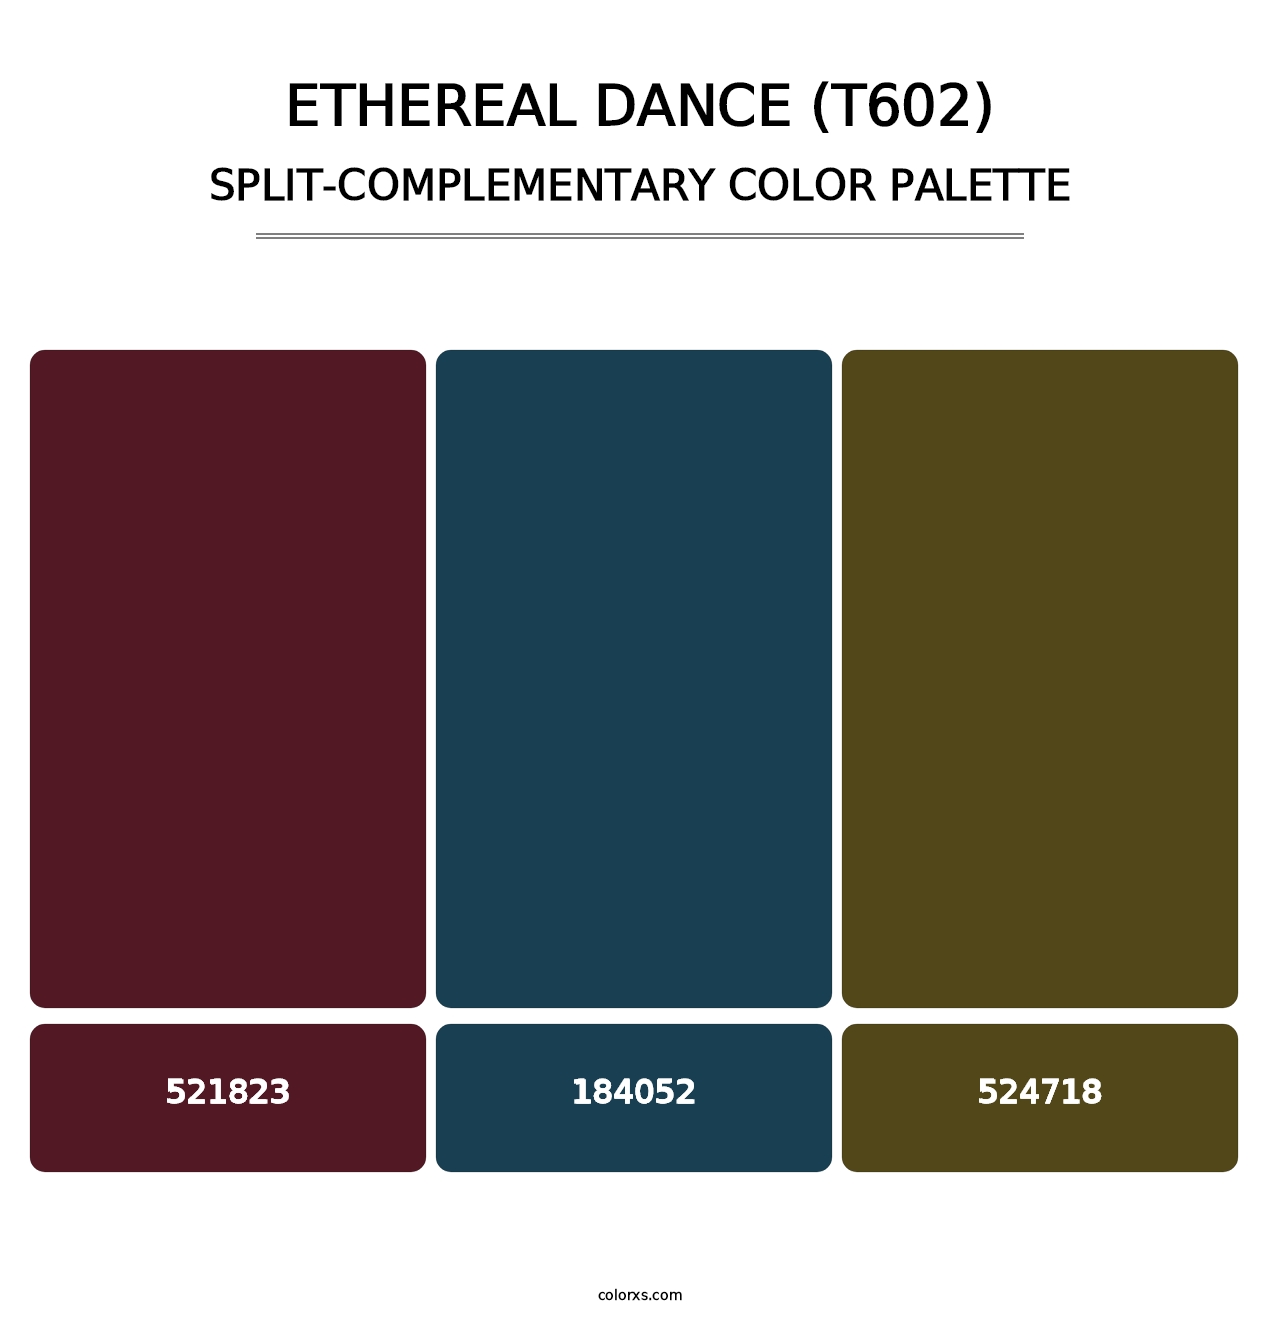 Ethereal Dance (T602) - Split-Complementary Color Palette